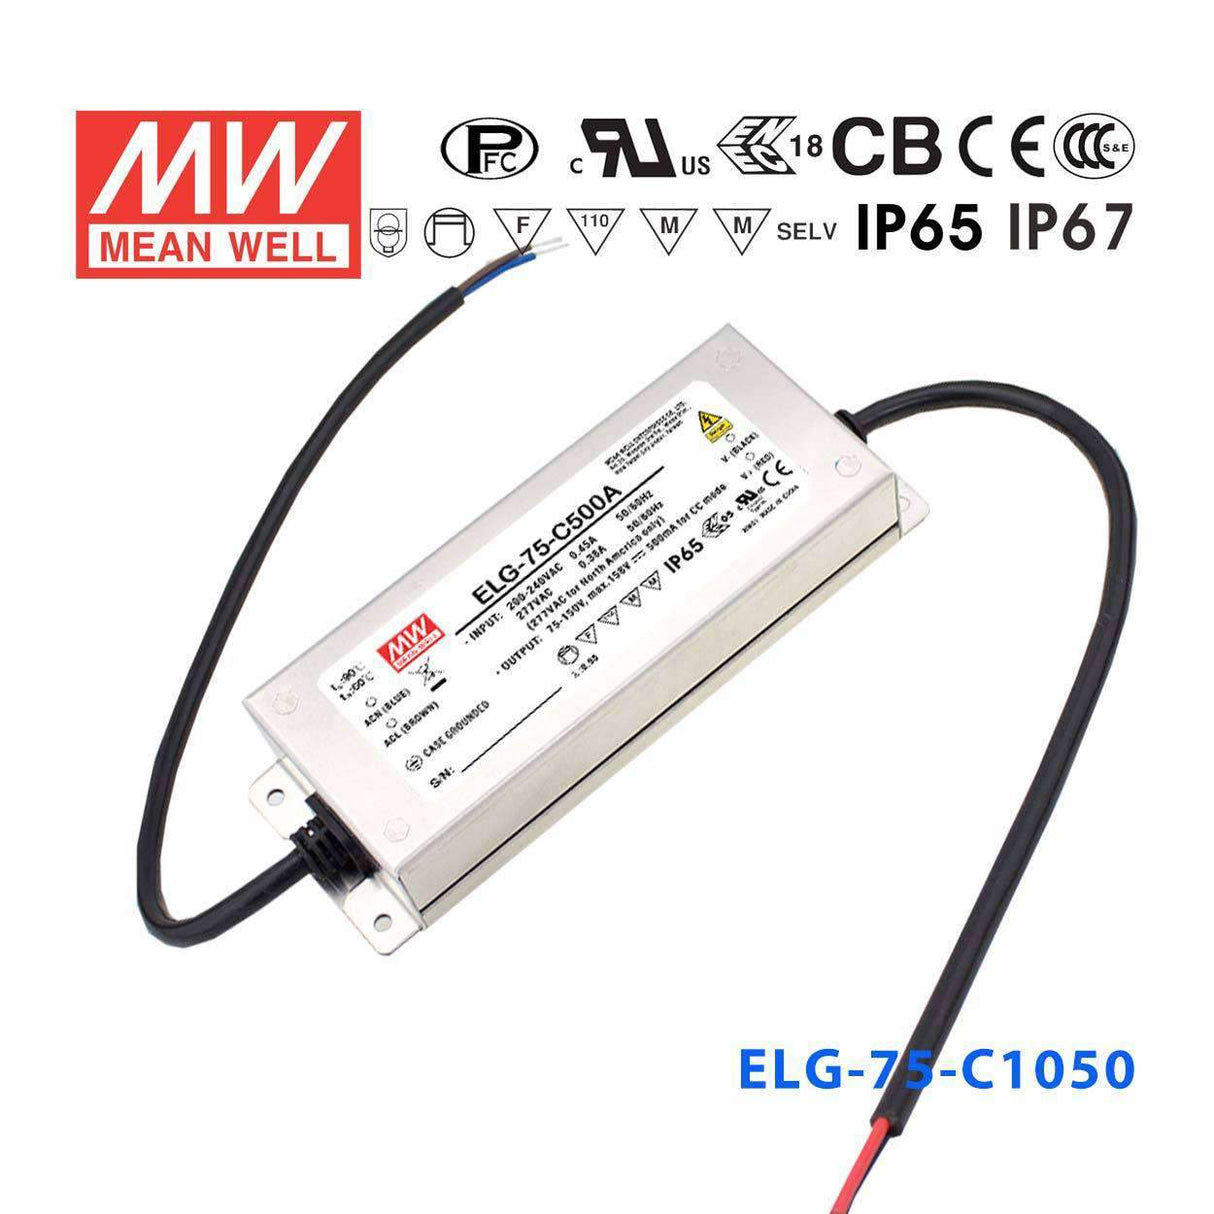 Mean Well ELG-75-C1050D2 AC-DC Single output LED Driver Constant Current Mode with PFC